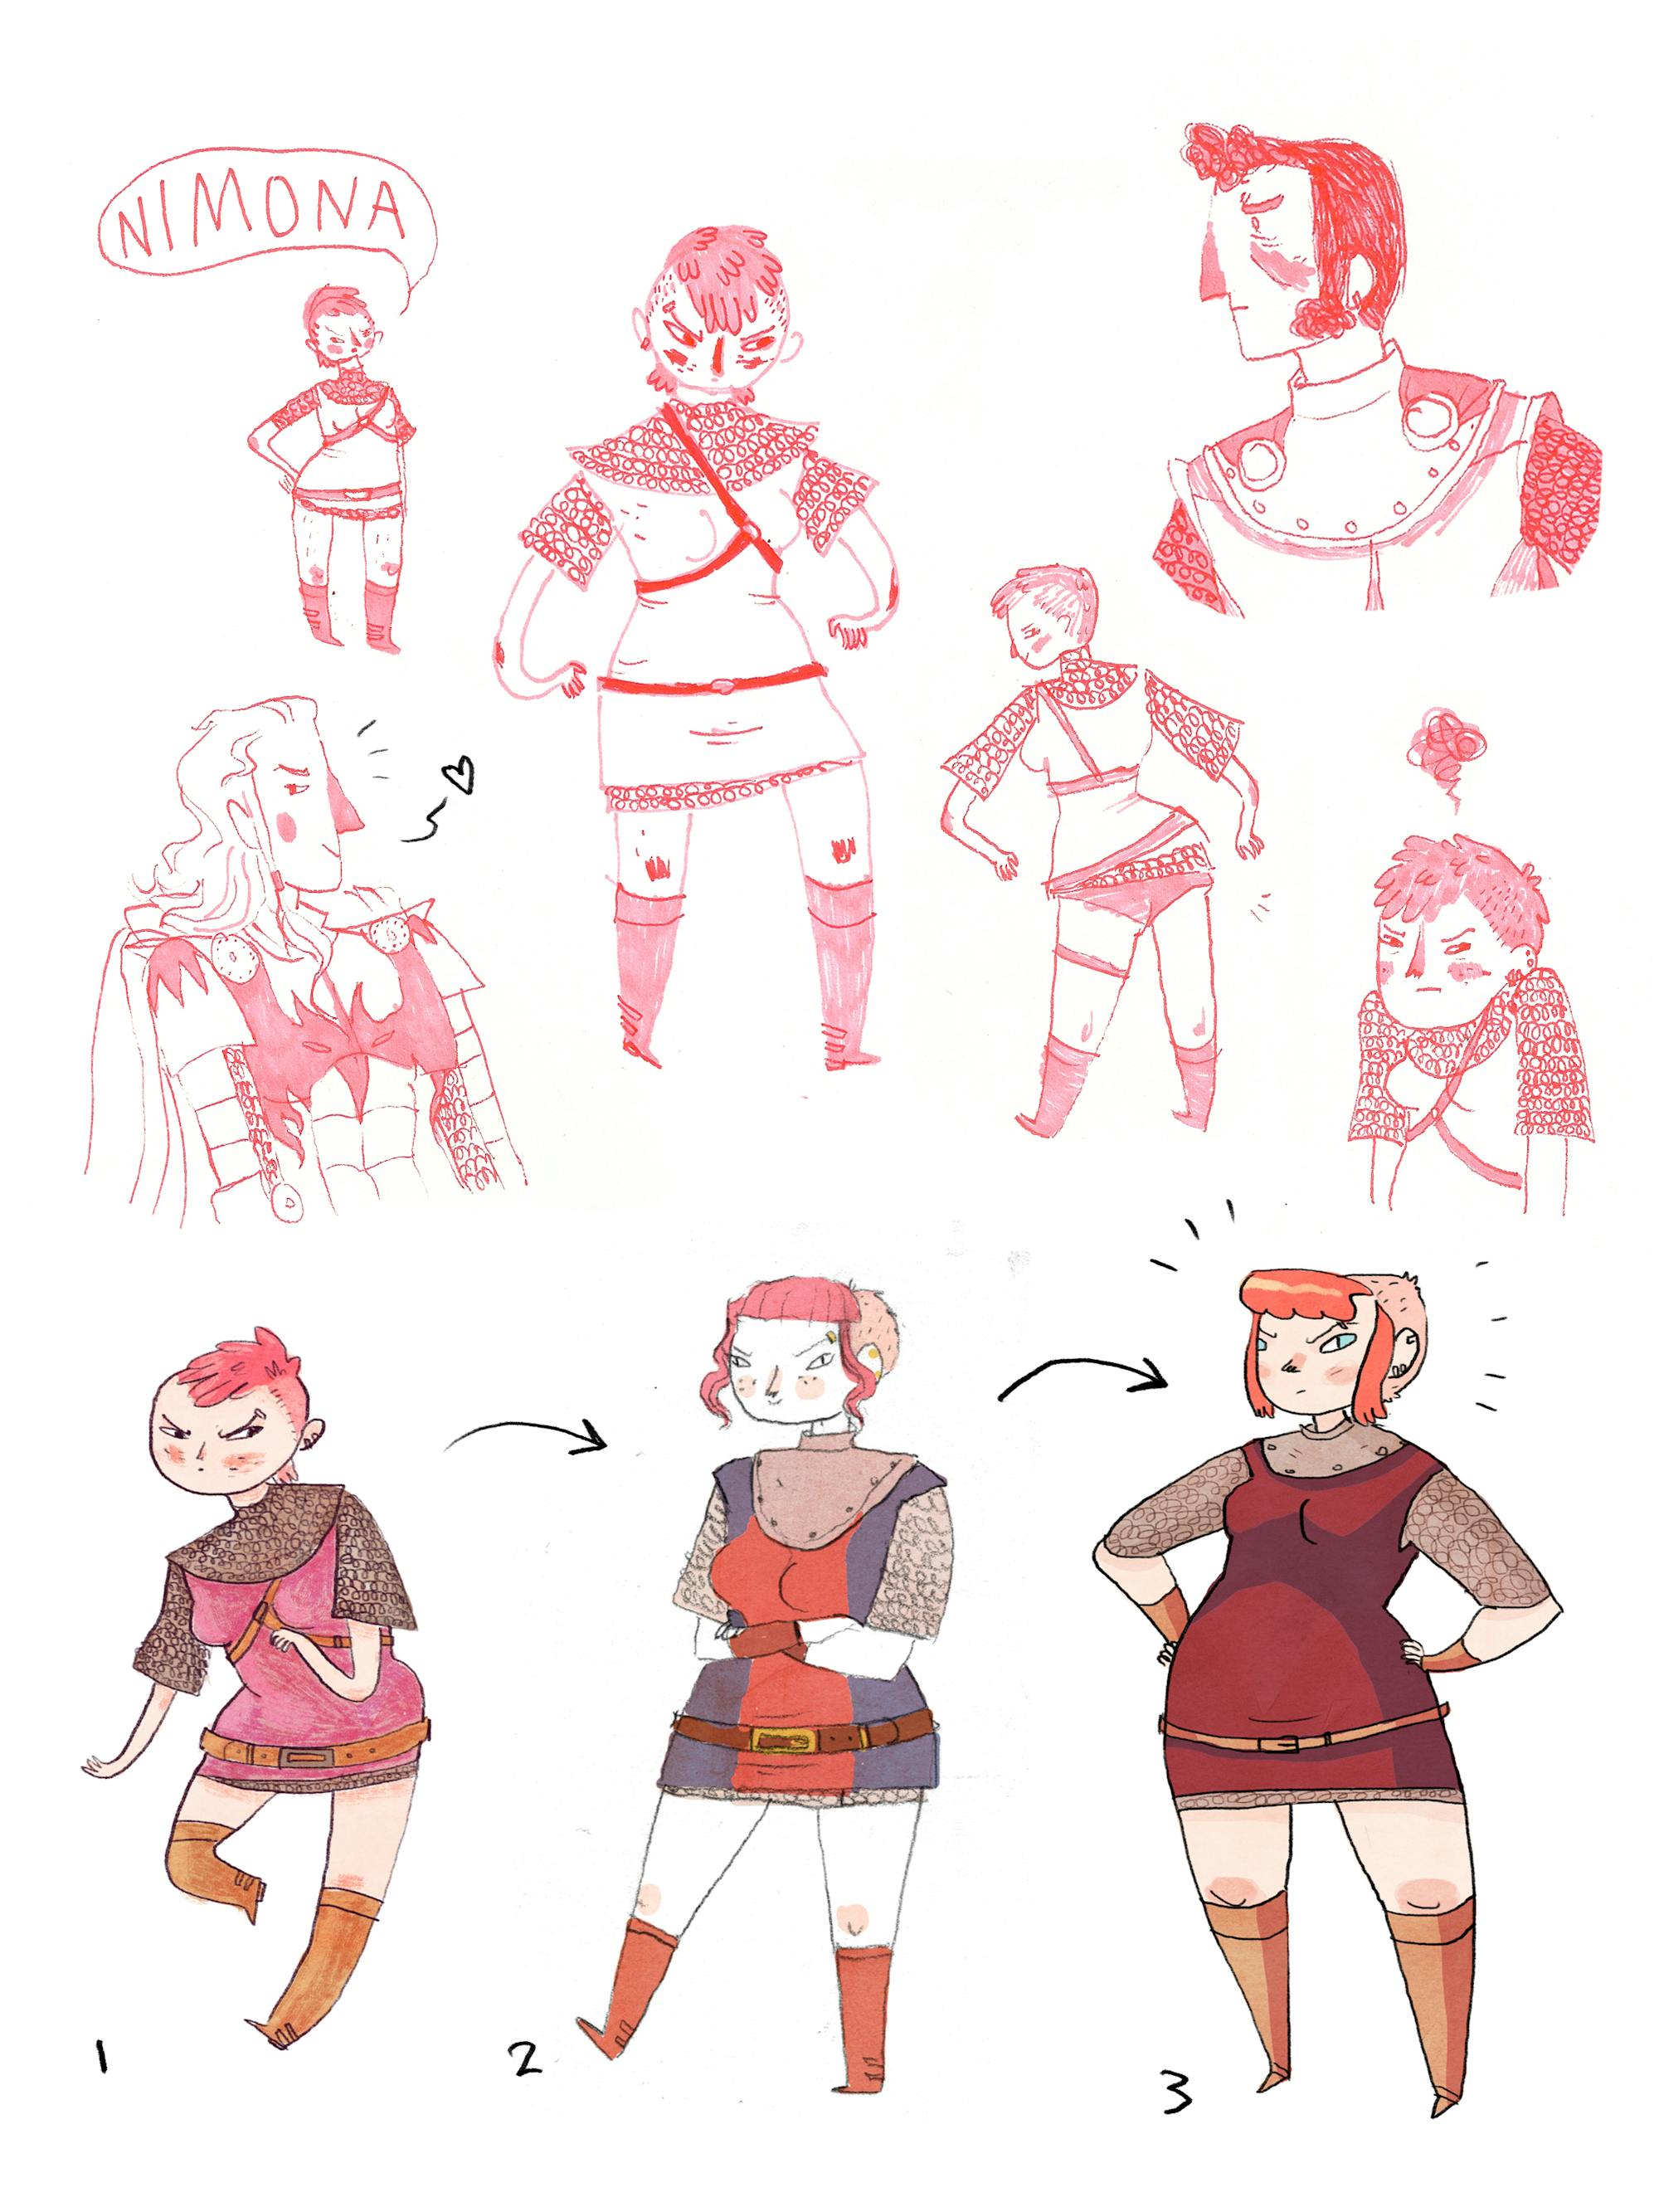 Early sketches of Nimona: she wears a red dress and tall boots.